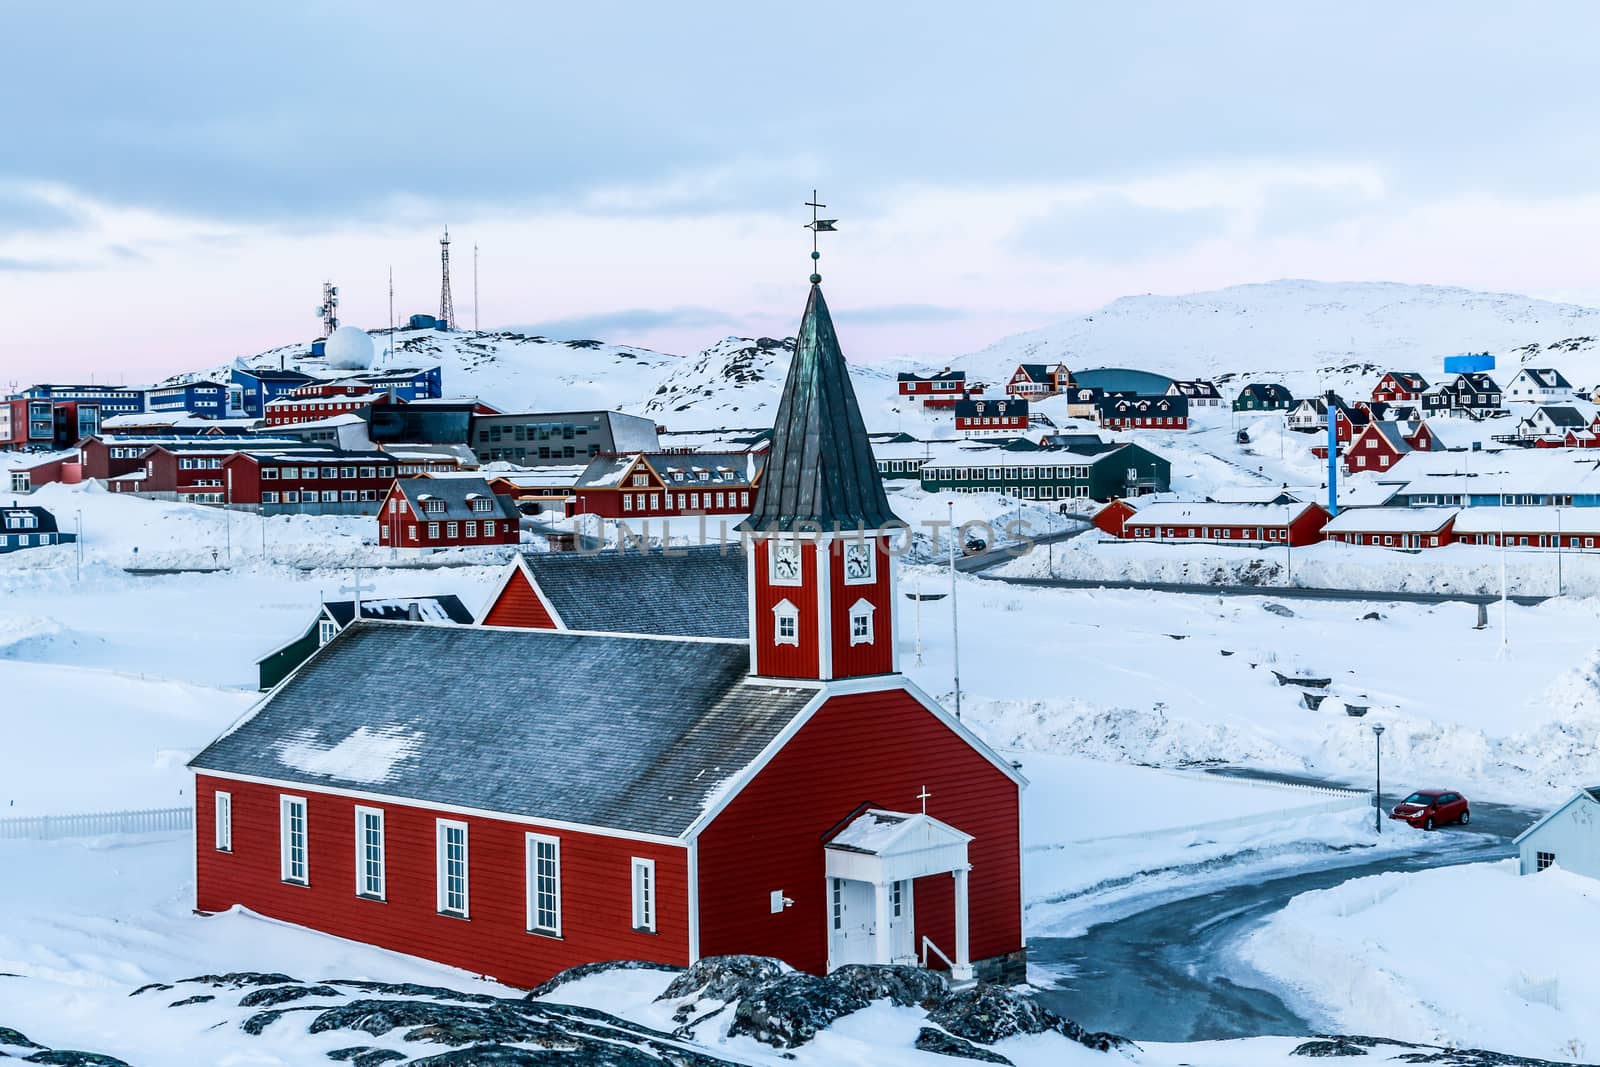 Annaassisitta Oqaluffia, church of our Saviour in Historical center of Nuuk